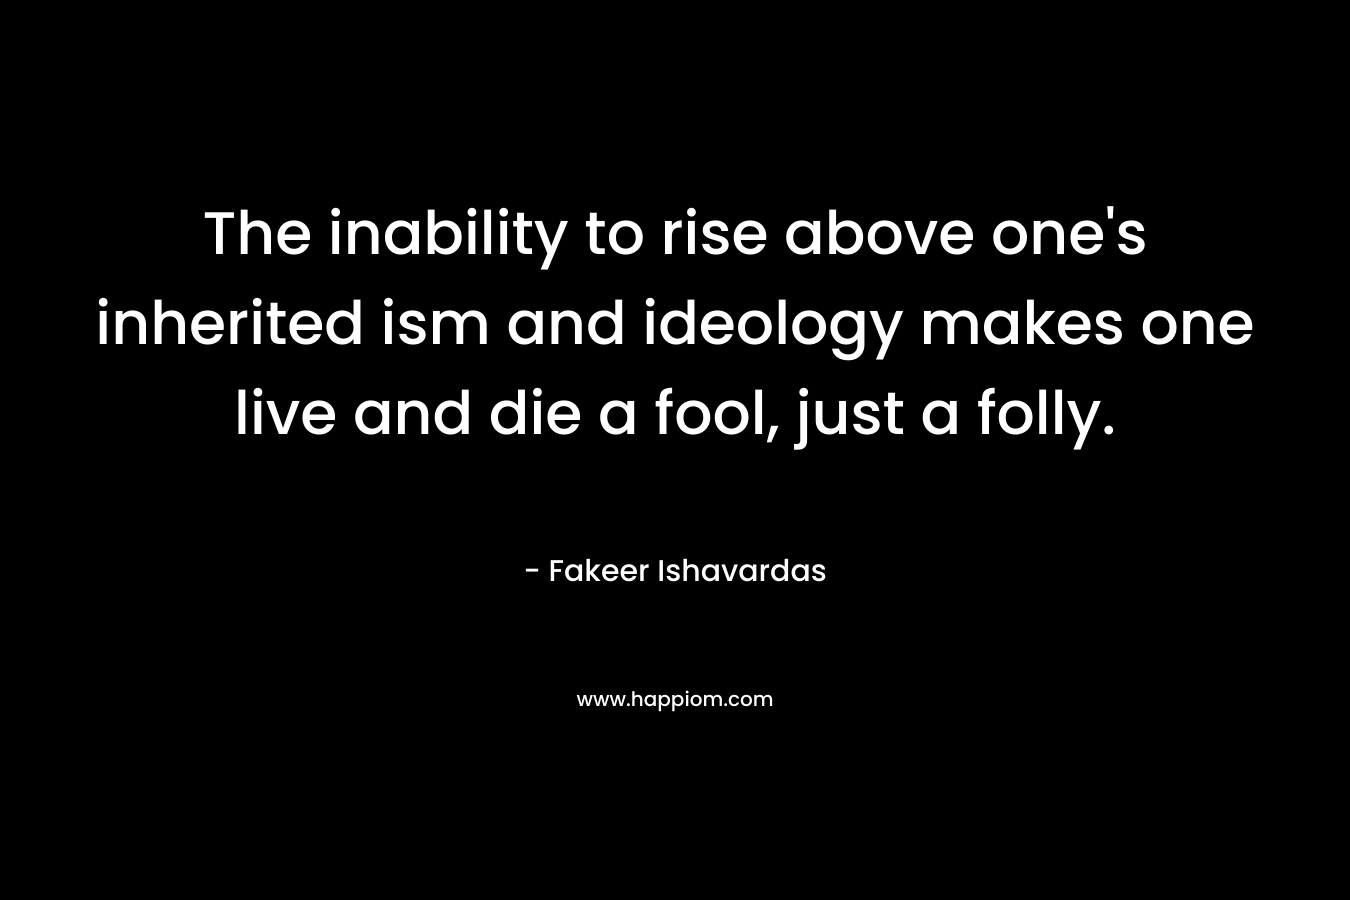 The inability to rise above one's inherited ism and ideology makes one live and die a fool, just a folly.